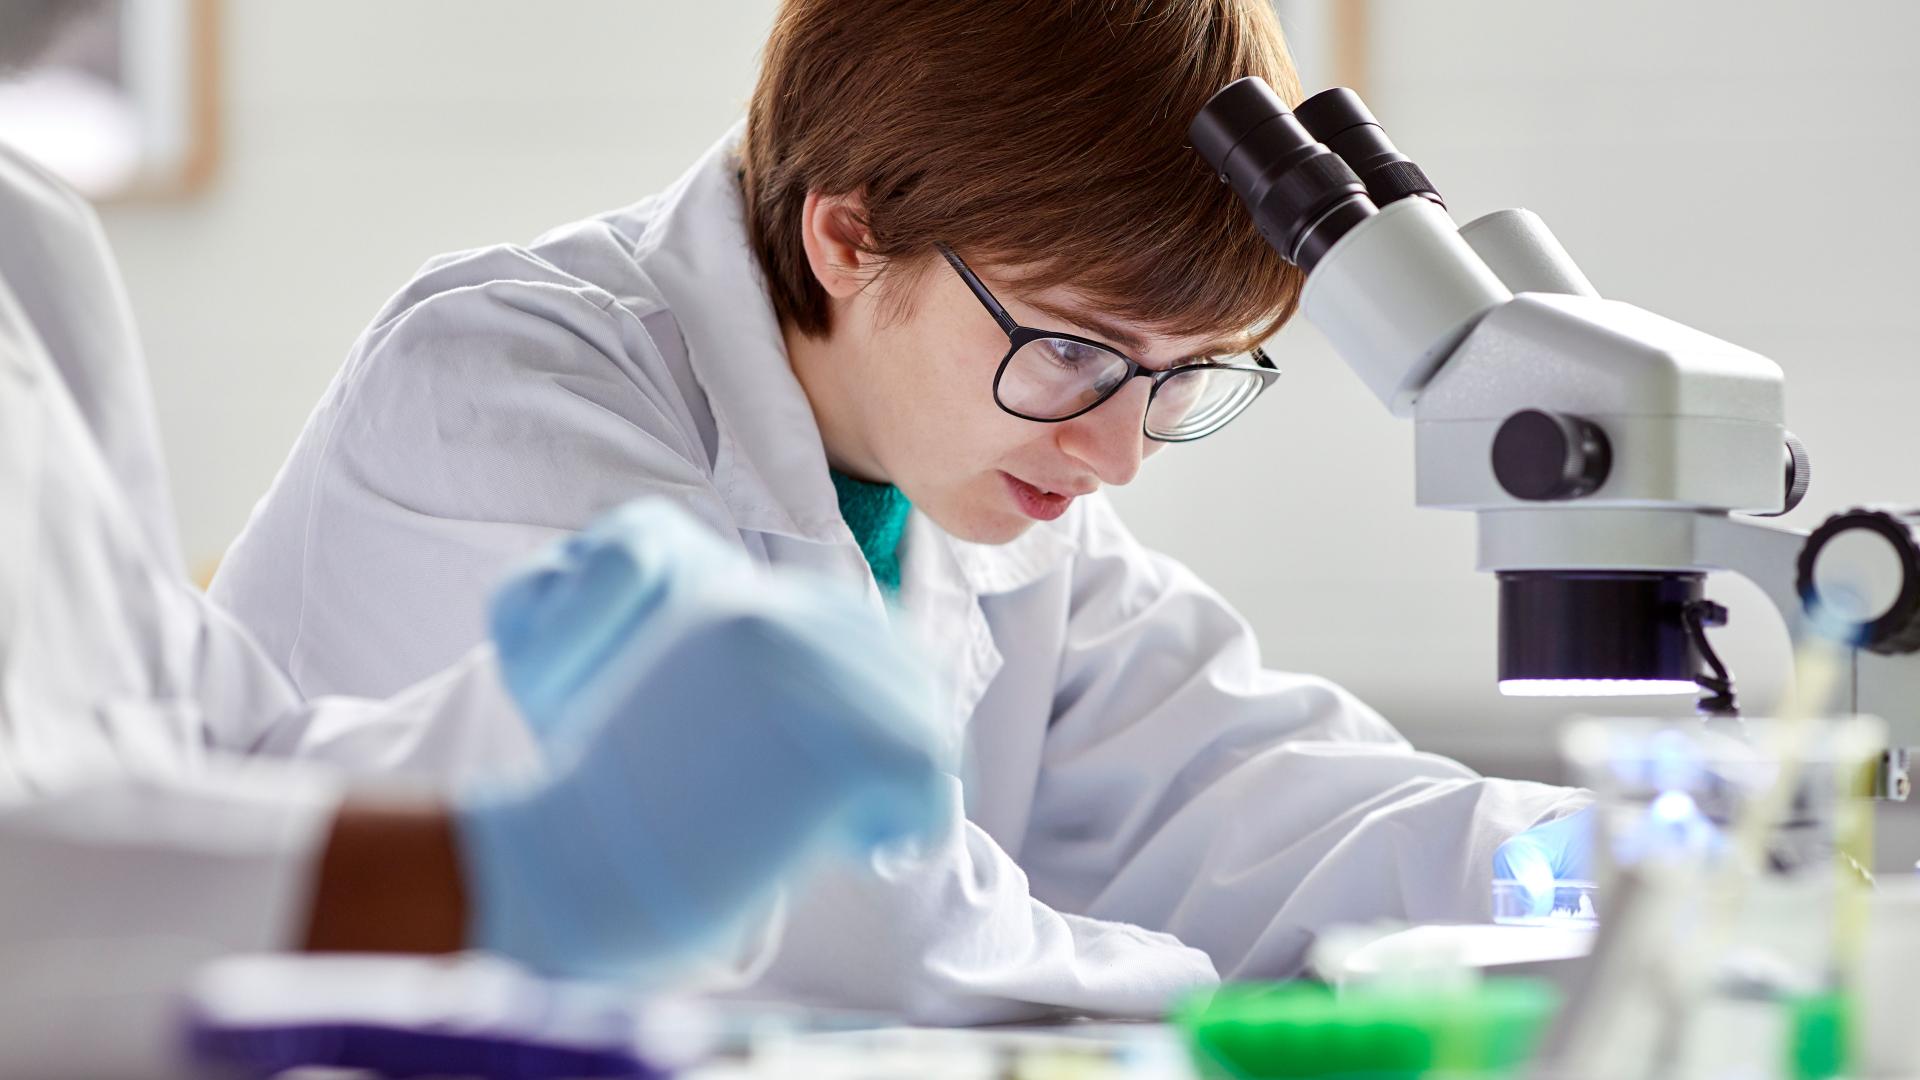 courses in biology education